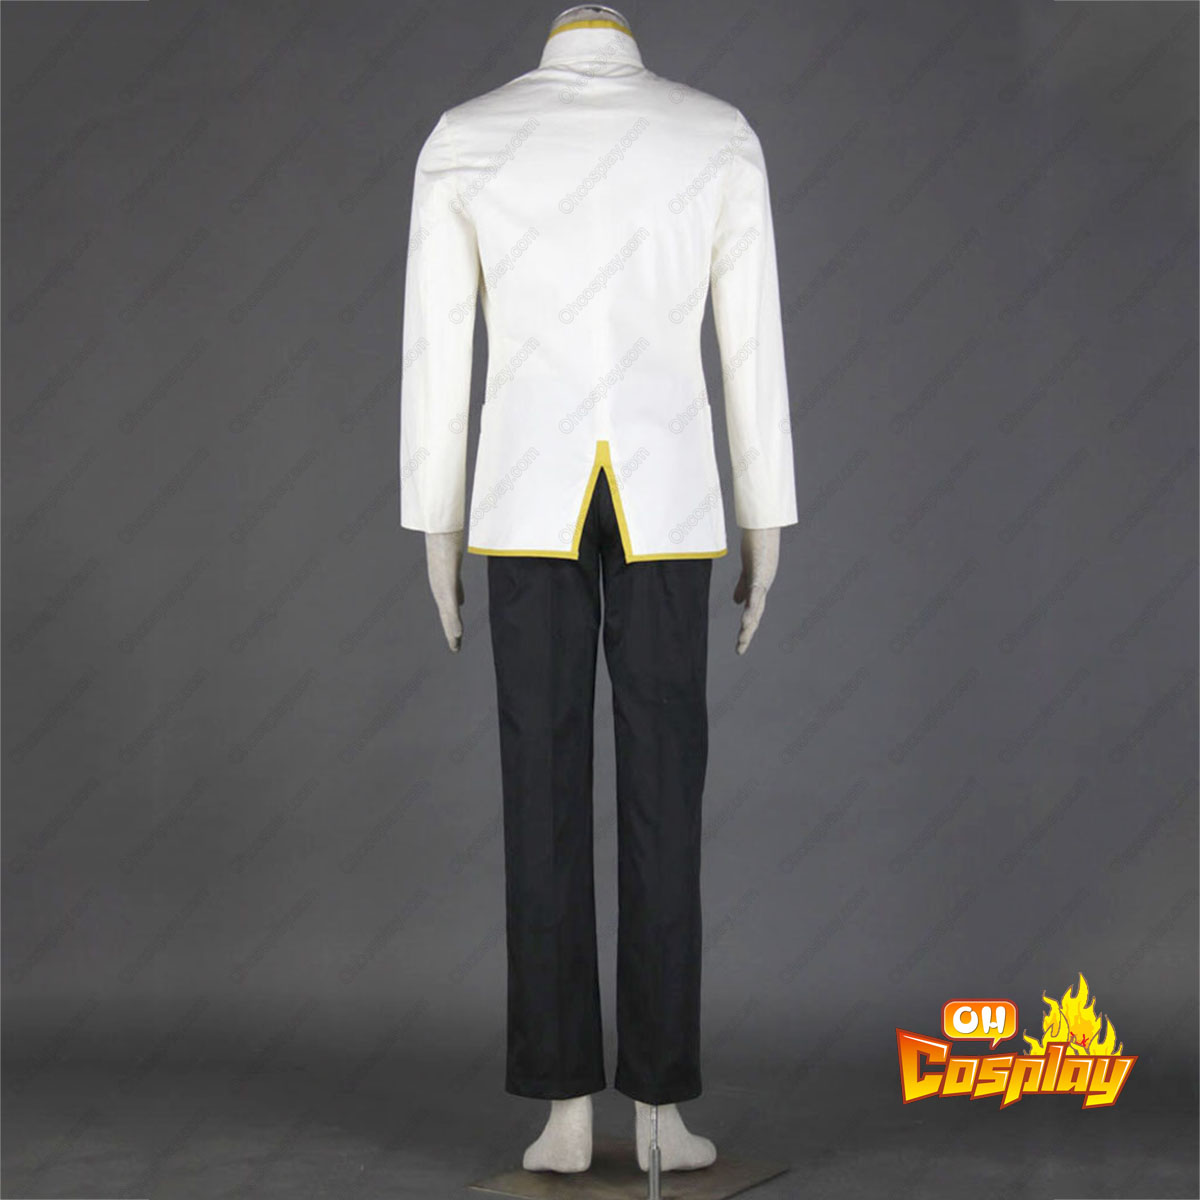 Ouran High School Host Club Male Uniforms Yellow Cosplay Costumes Deluxe Edition